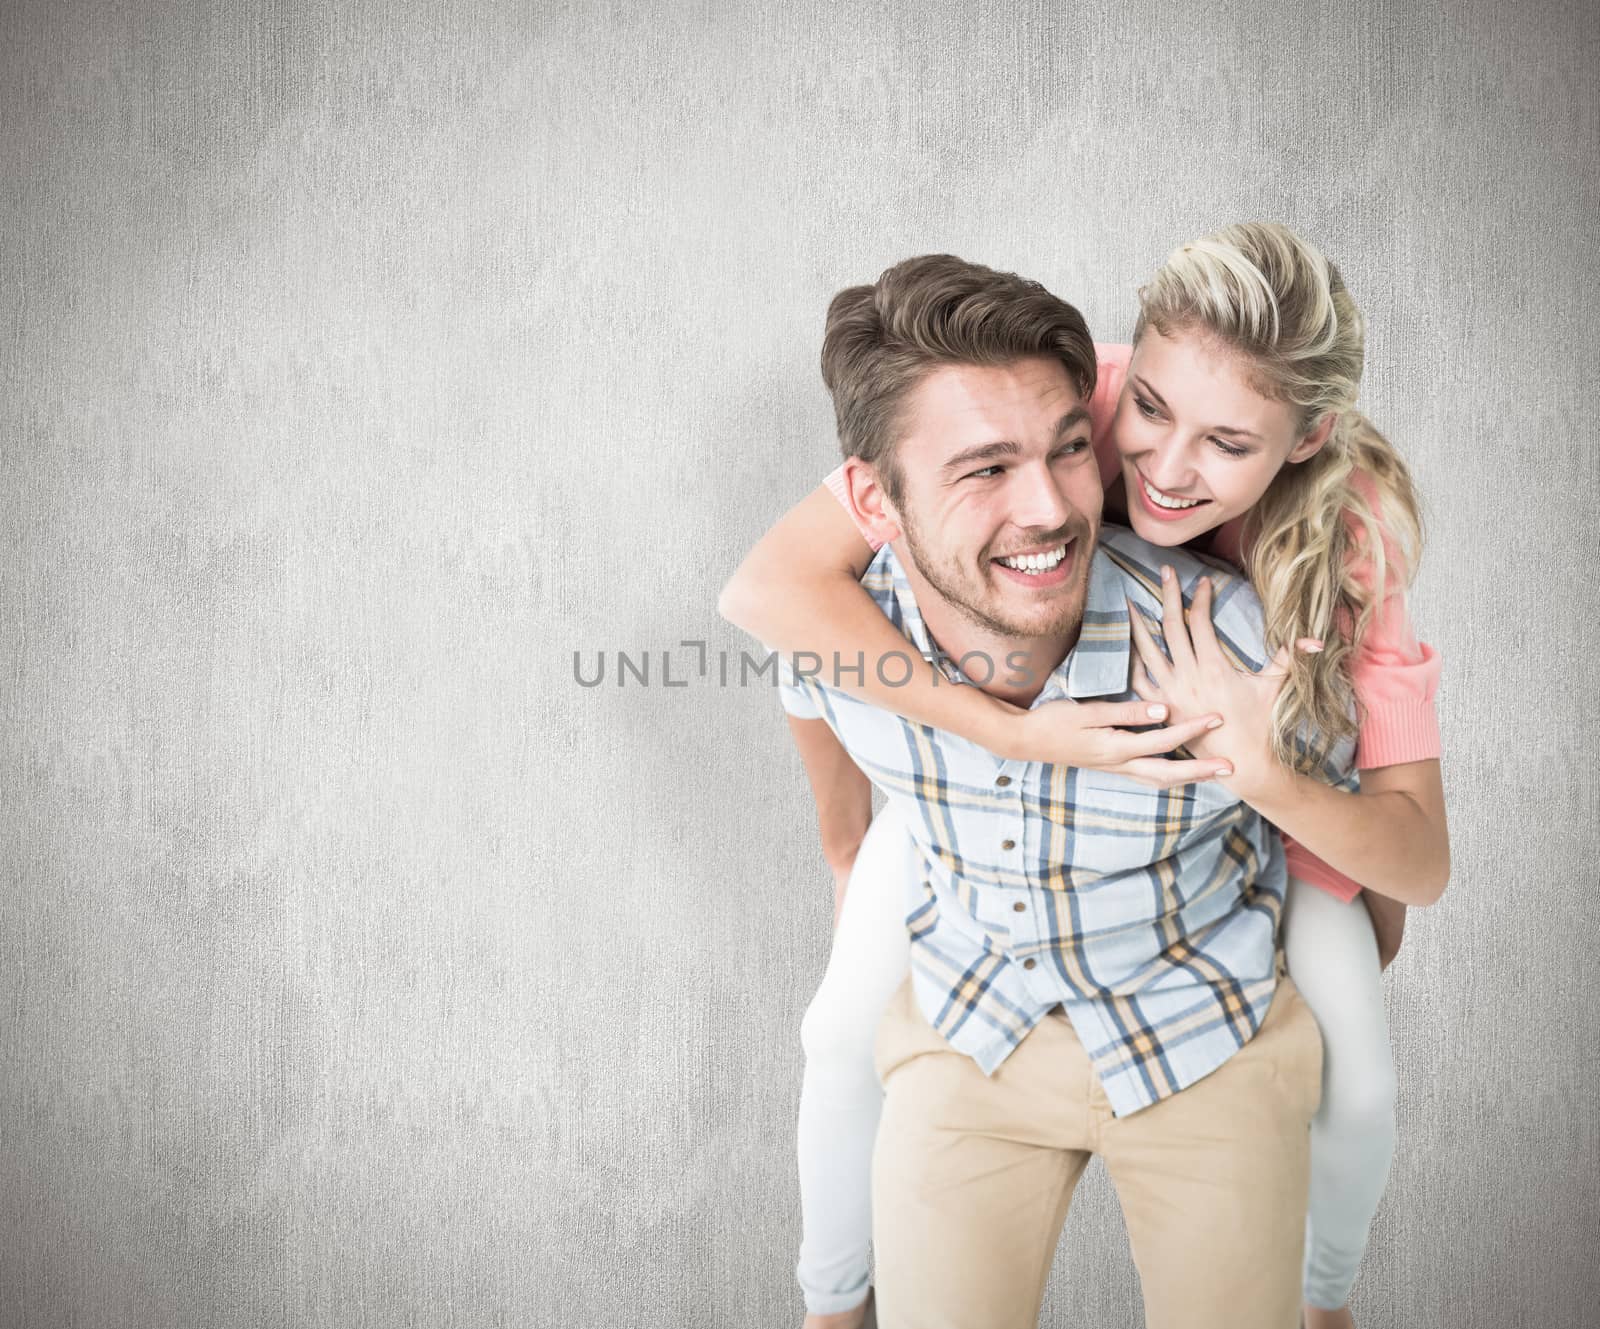 Handsome man giving piggy back to his girlfriend against white background